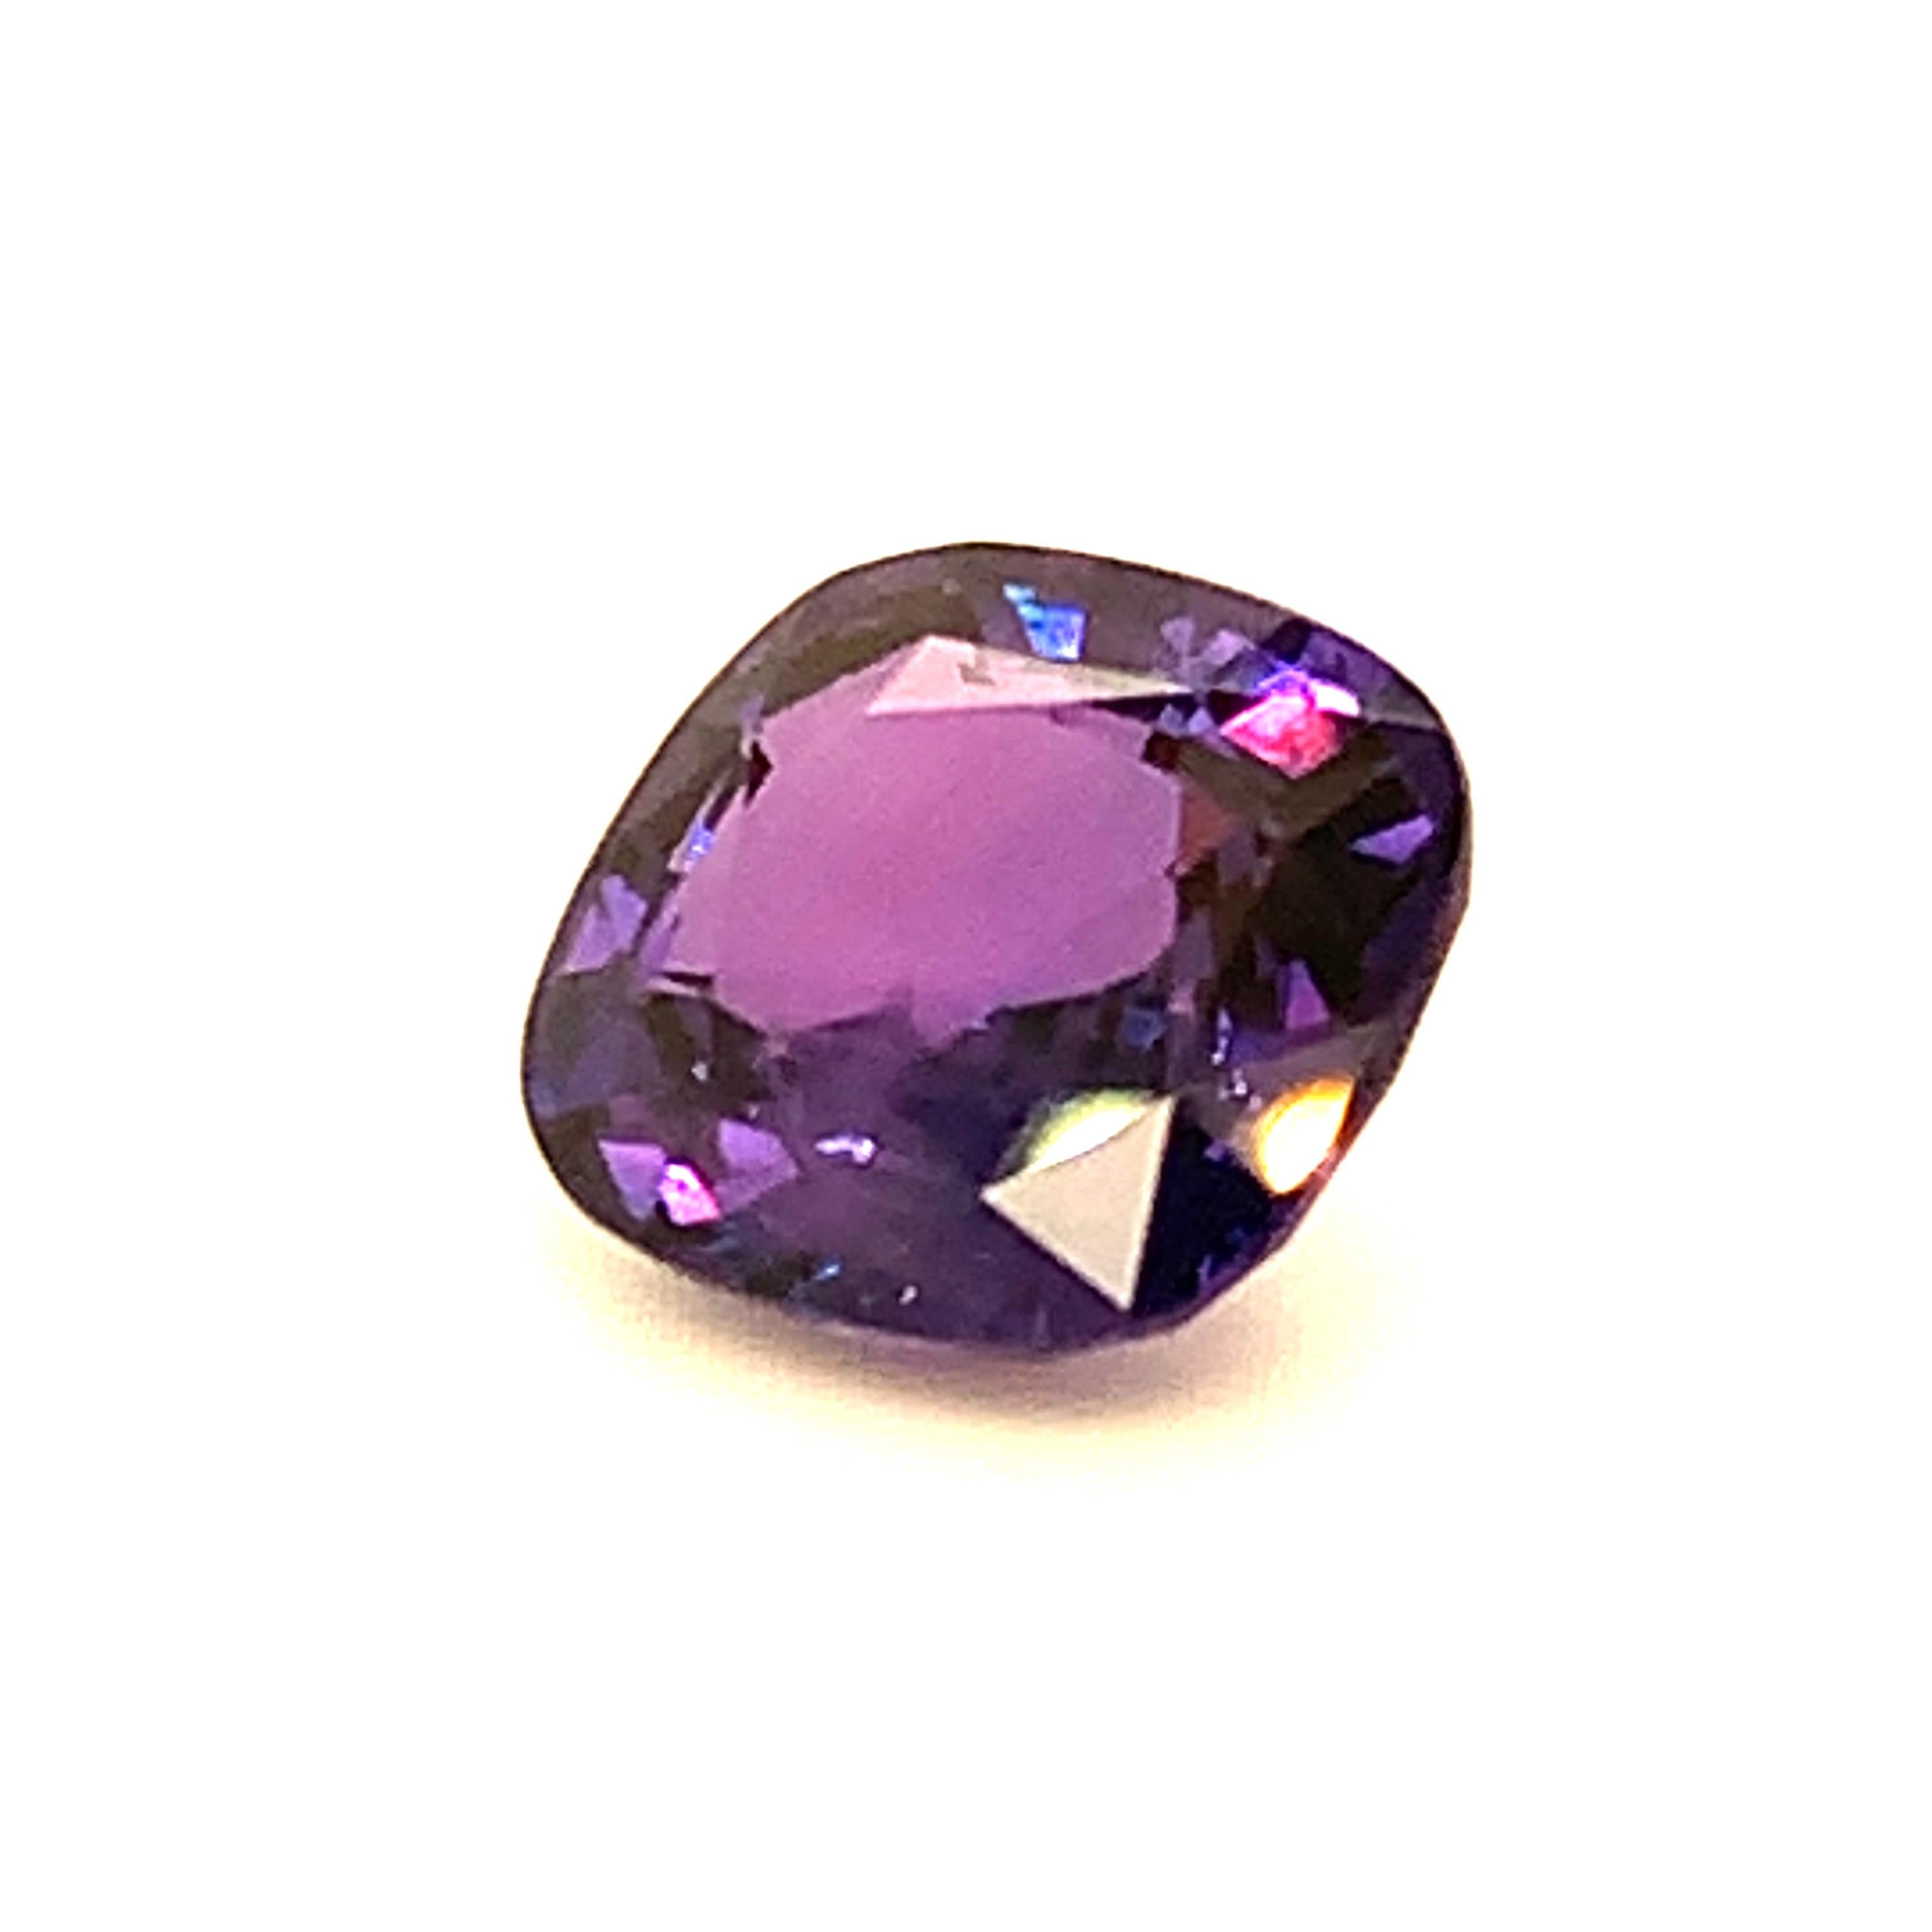 6.76 Carat Color Change Sapphire Cushion, Unset Loose Gemstone, GIA Certified 10